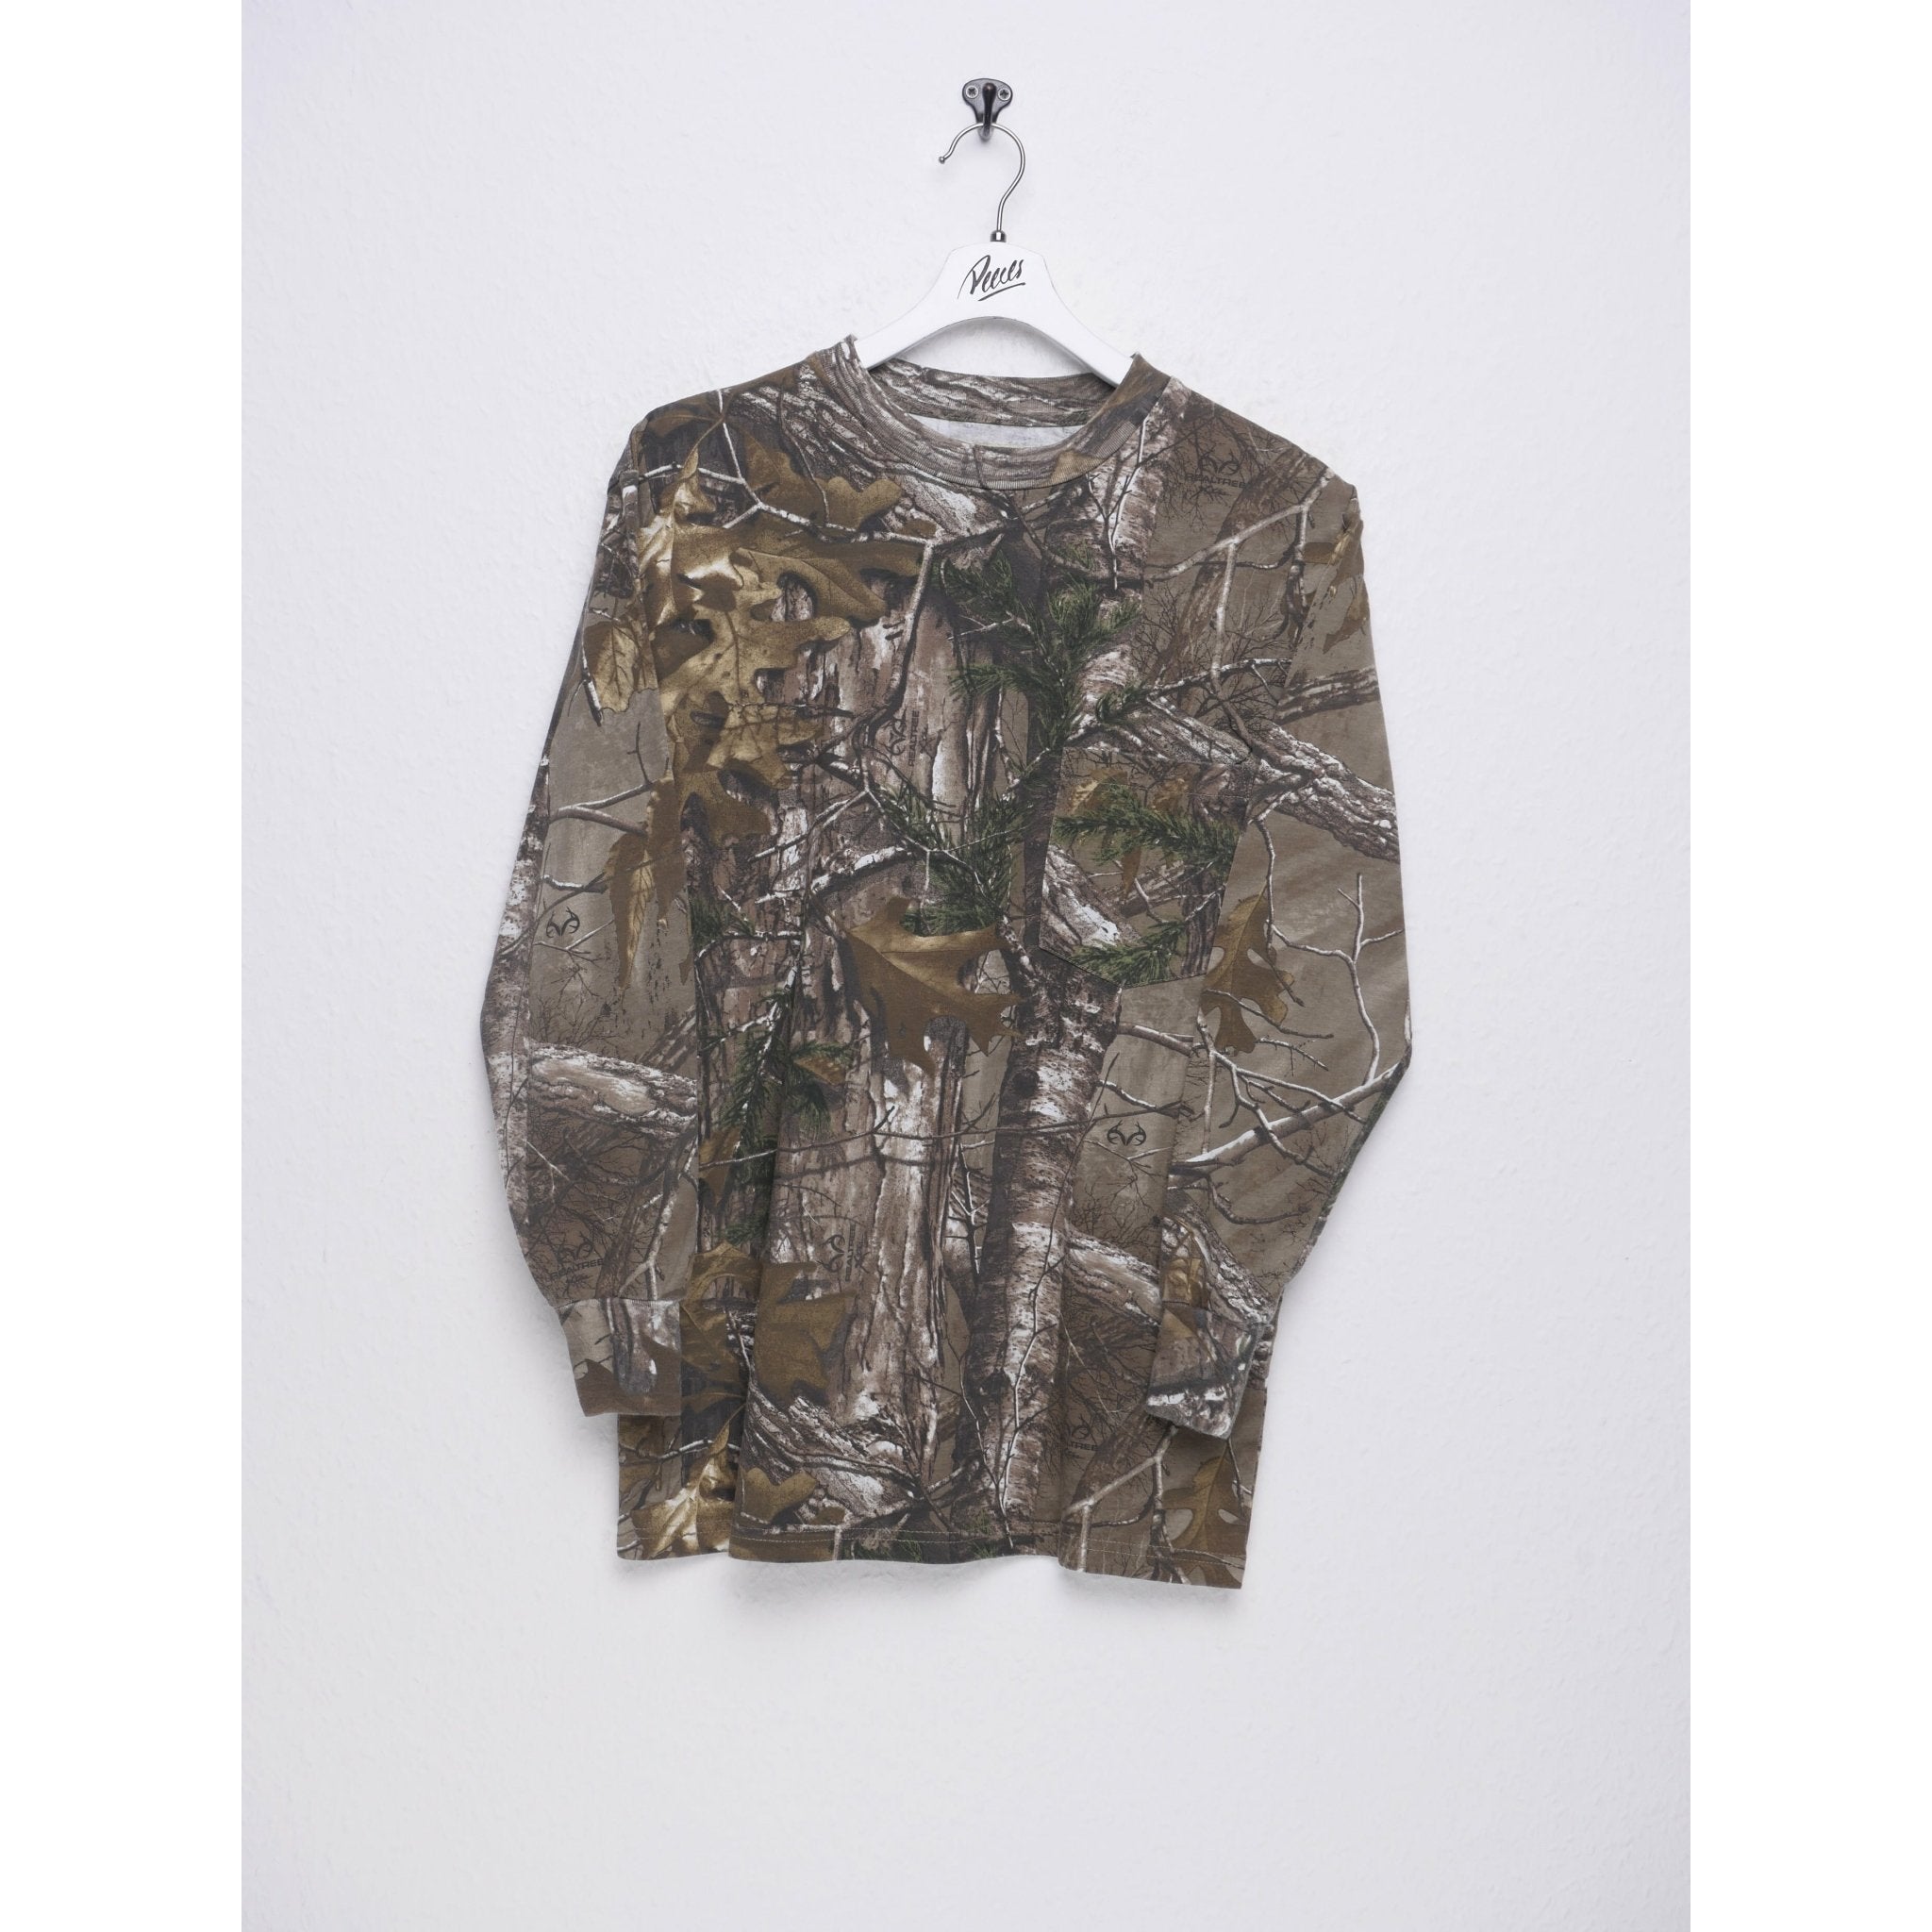 Wrangler printed forest Graphic Vintage Shirt - Peeces